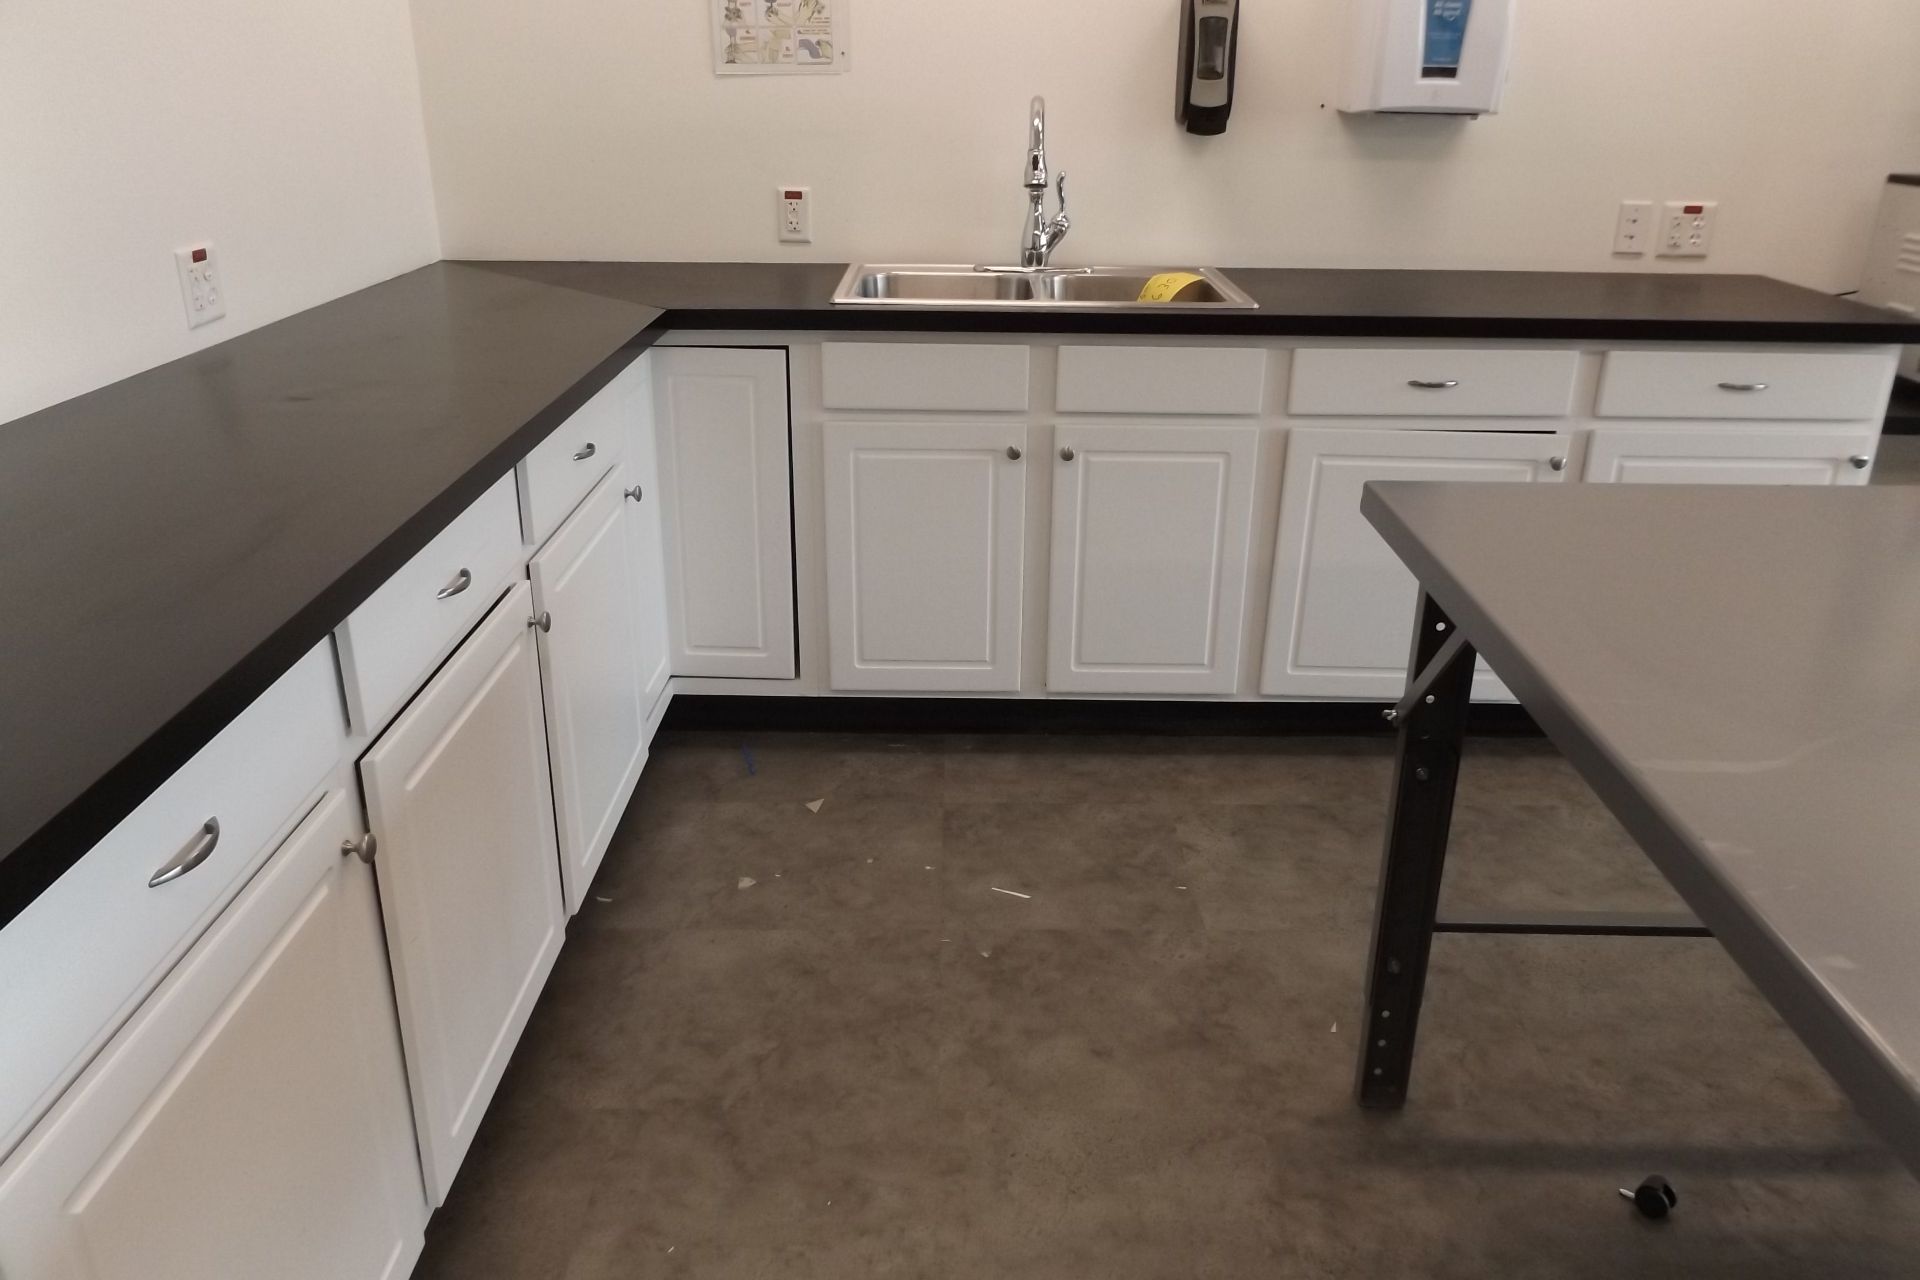 LOT OF SINK, COUNTER AND CABINETS (NOTE: WATER SUPPLY LINES MUST BE PROFESSIONALLY CAPPED ) (FRONT